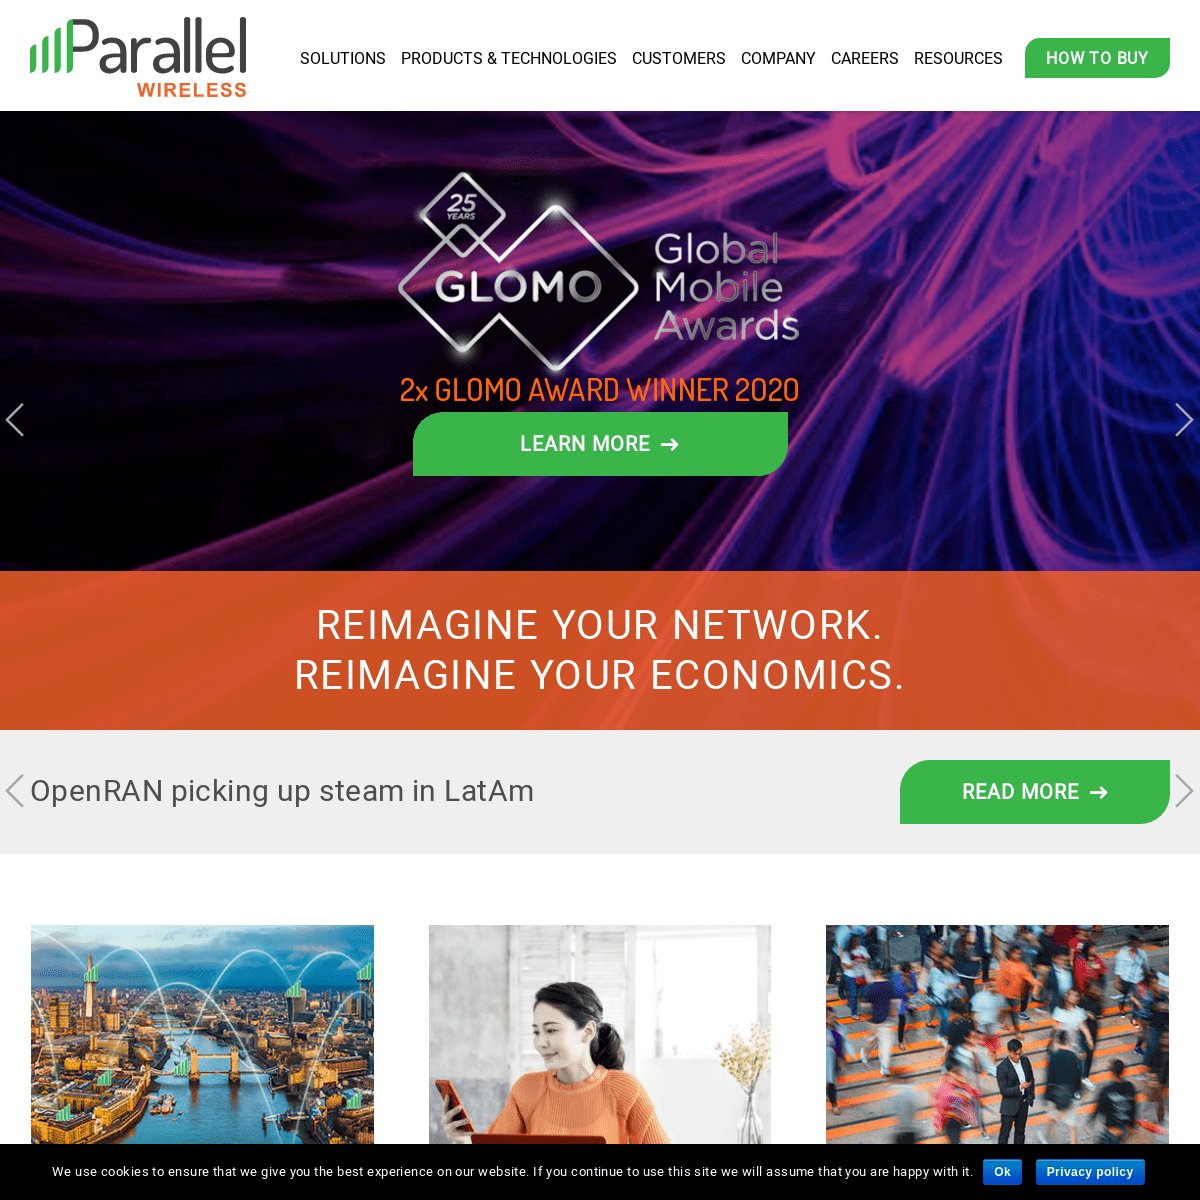 A complete backup of parallelwireless.com